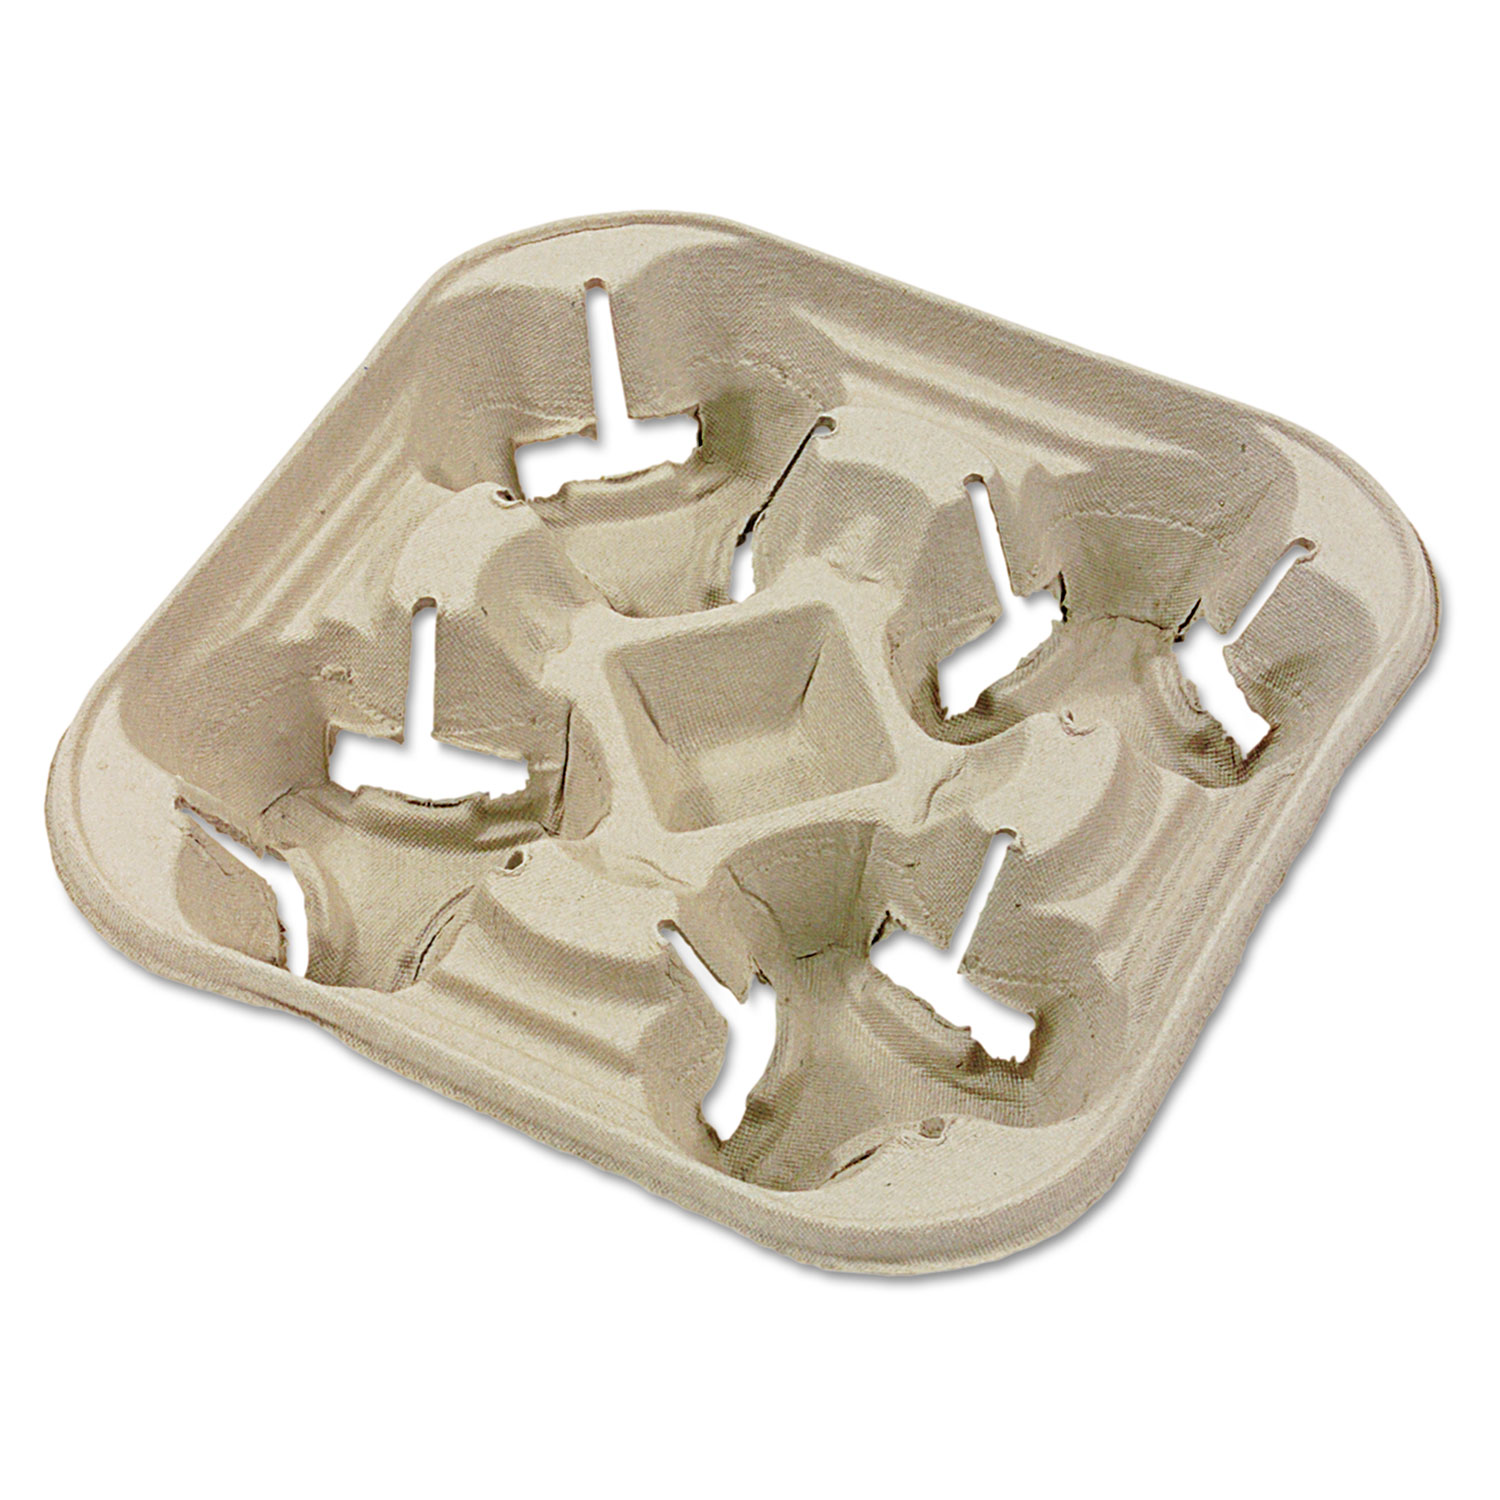  Chinet 20972 StrongHolder Molded Fiber Cup Tray, 8-22oz, Four Cups, 300/Carton (HUH20972) 